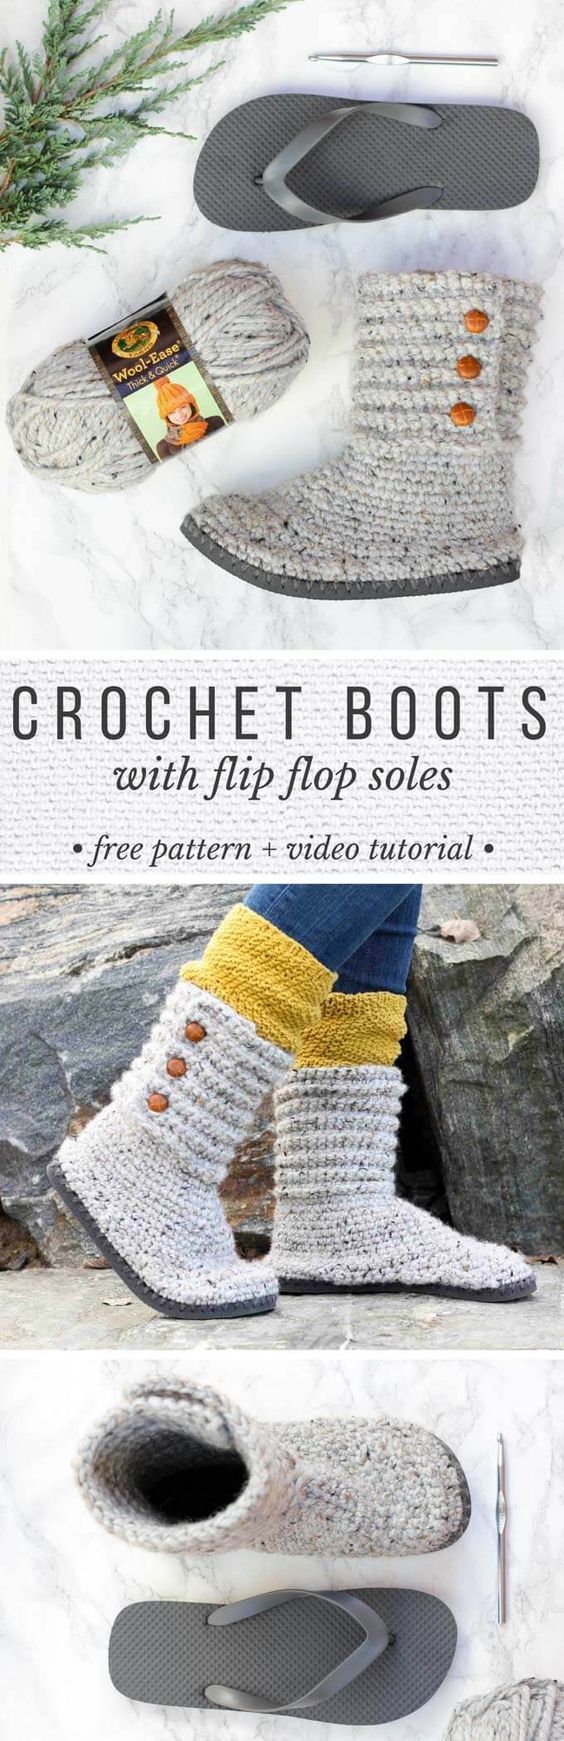 How to Crochet Boots with Flip Flops - Free Pattern + Video Tutorial